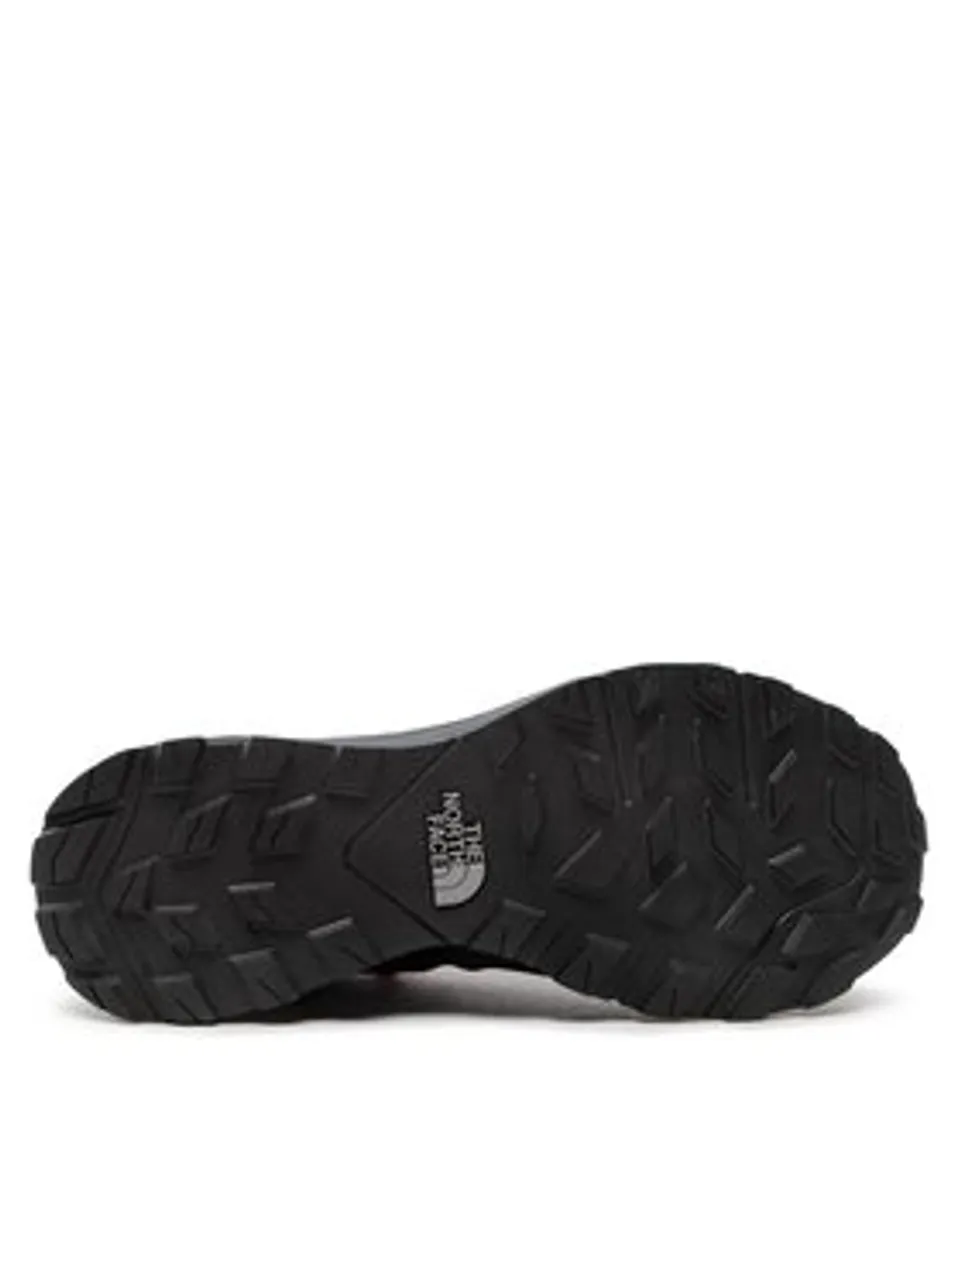 The North Face Trekkingschuhe Cragstone Mid Wp NF0A5LXBNY71 Schwarz